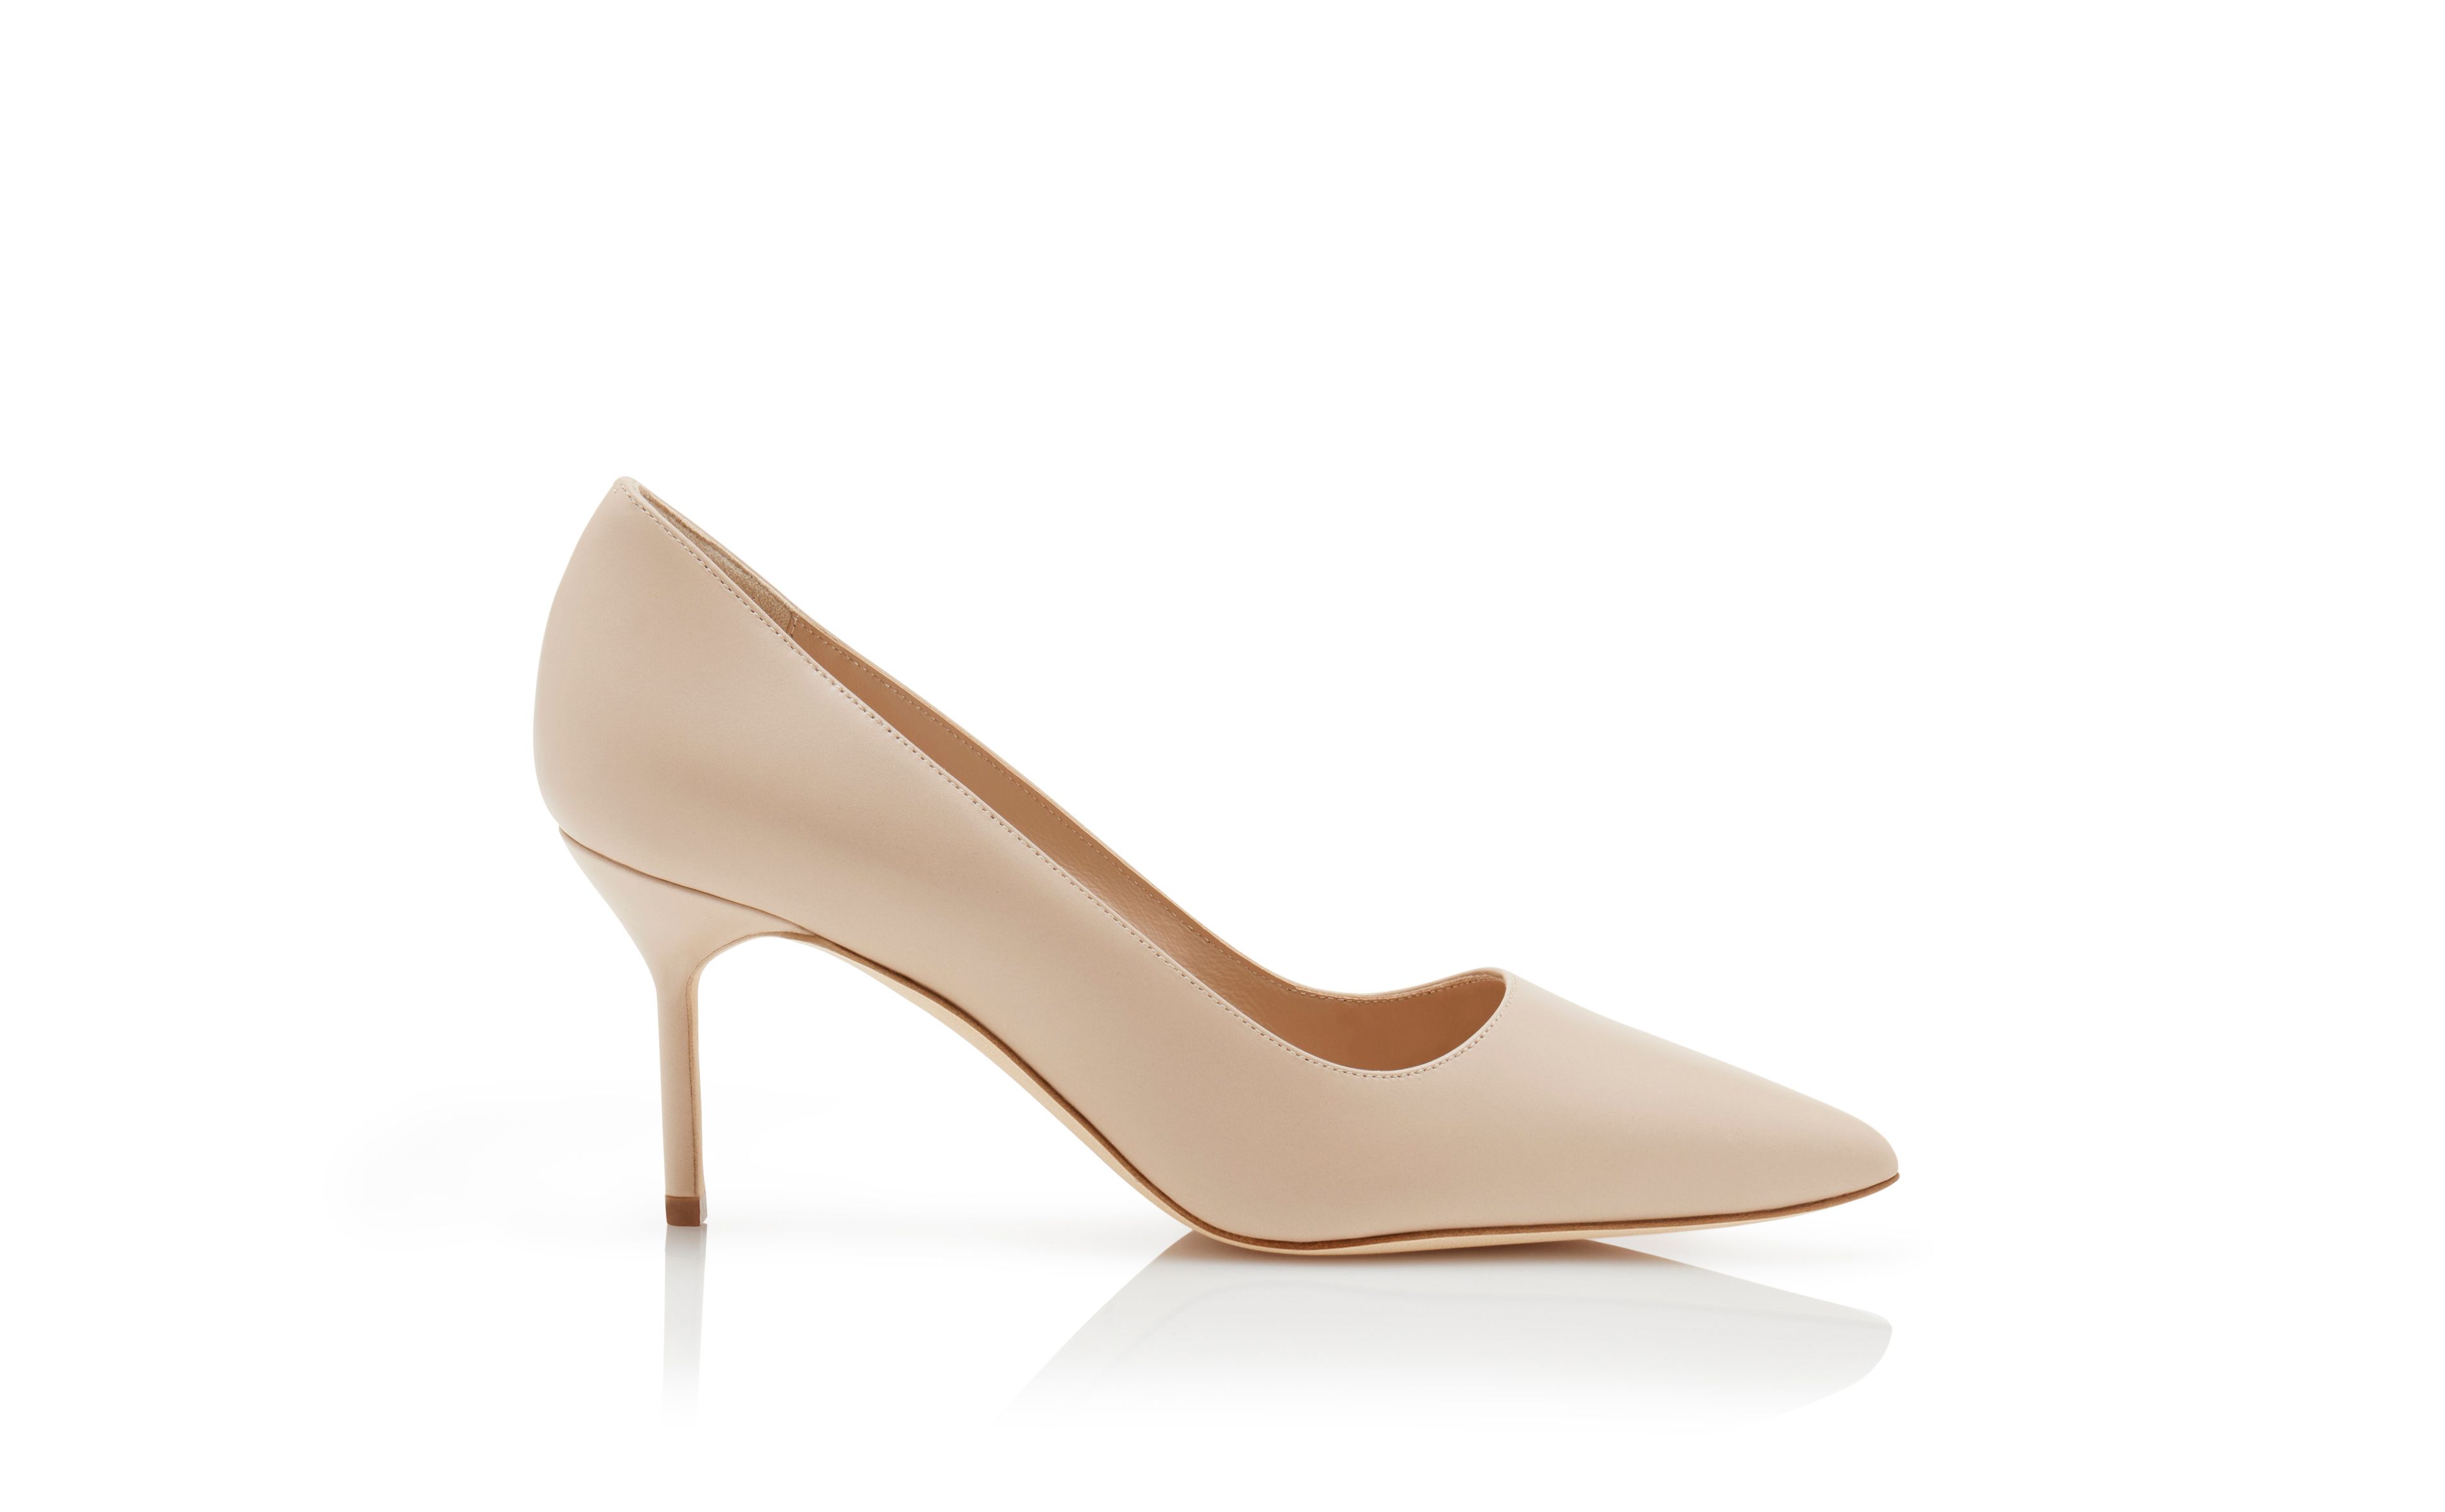 Designer Beige Calf Leather Pointed Toe Pumps - Image Side View